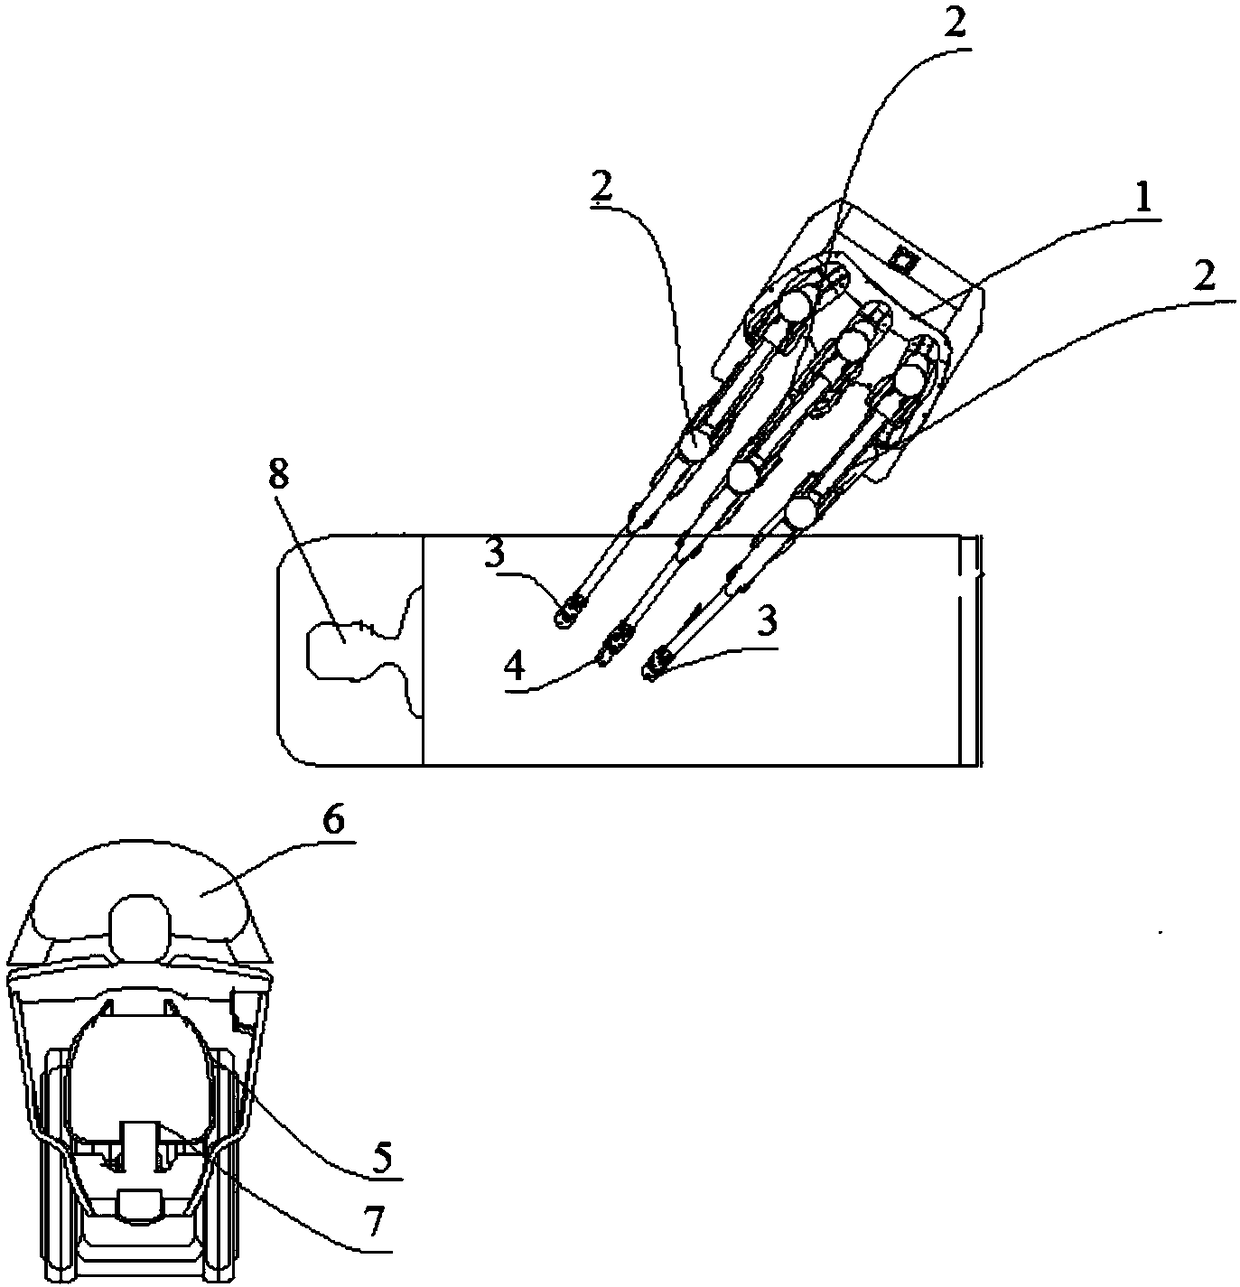 Surgical robot system and surgical instrument thereof